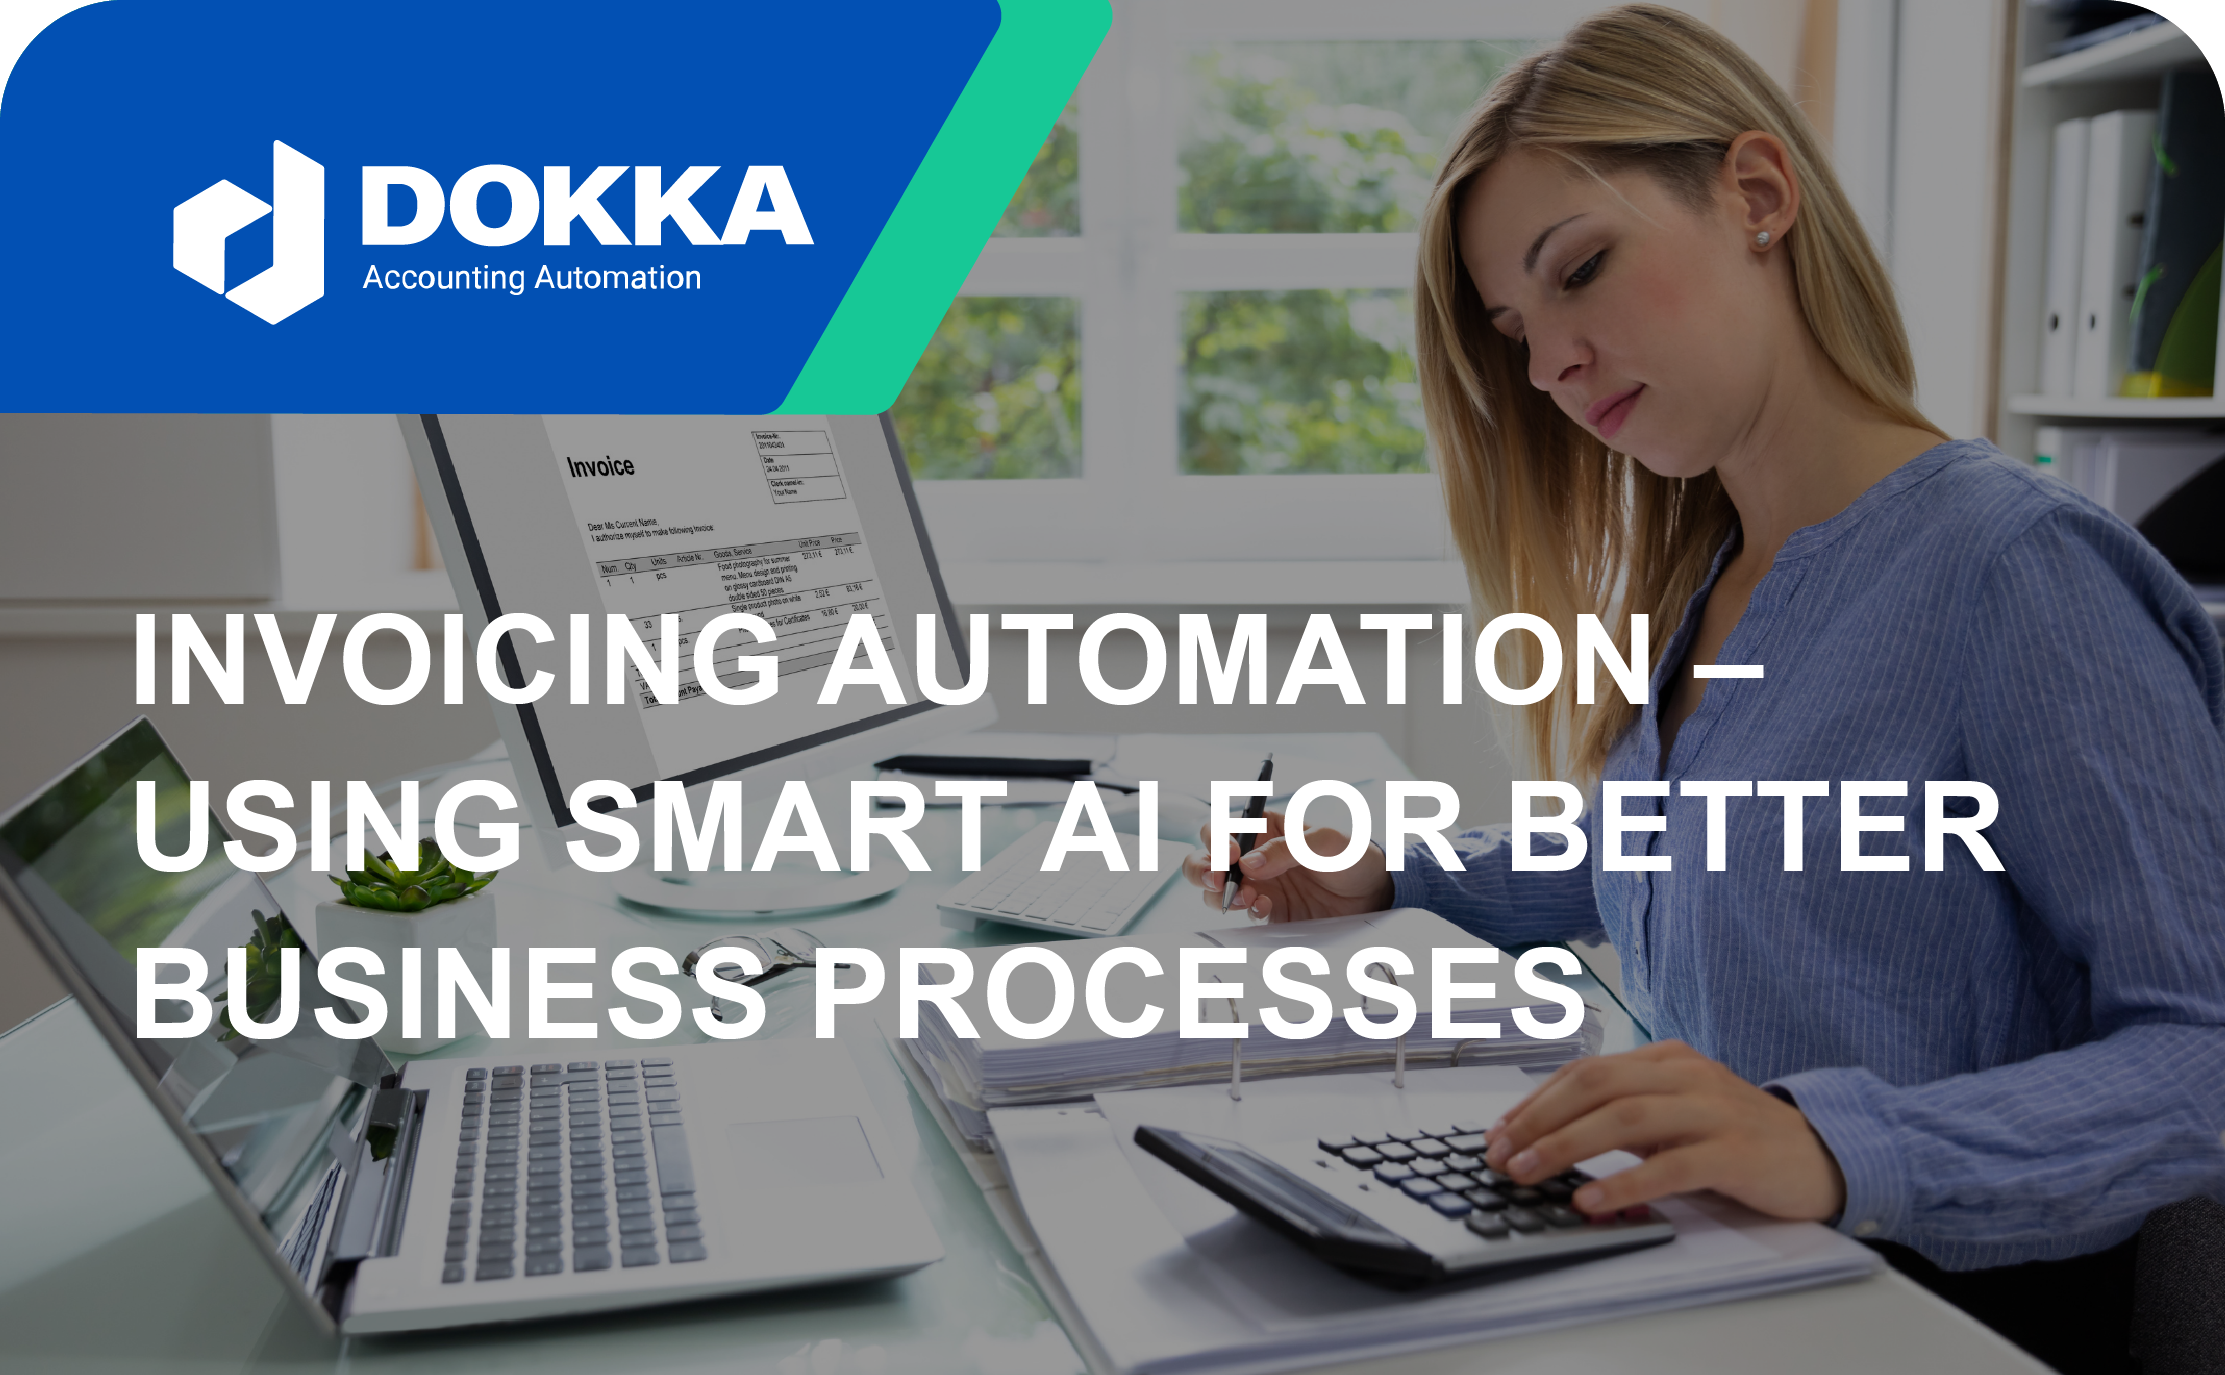 Invoicing automation – Using smart AI for better business processes